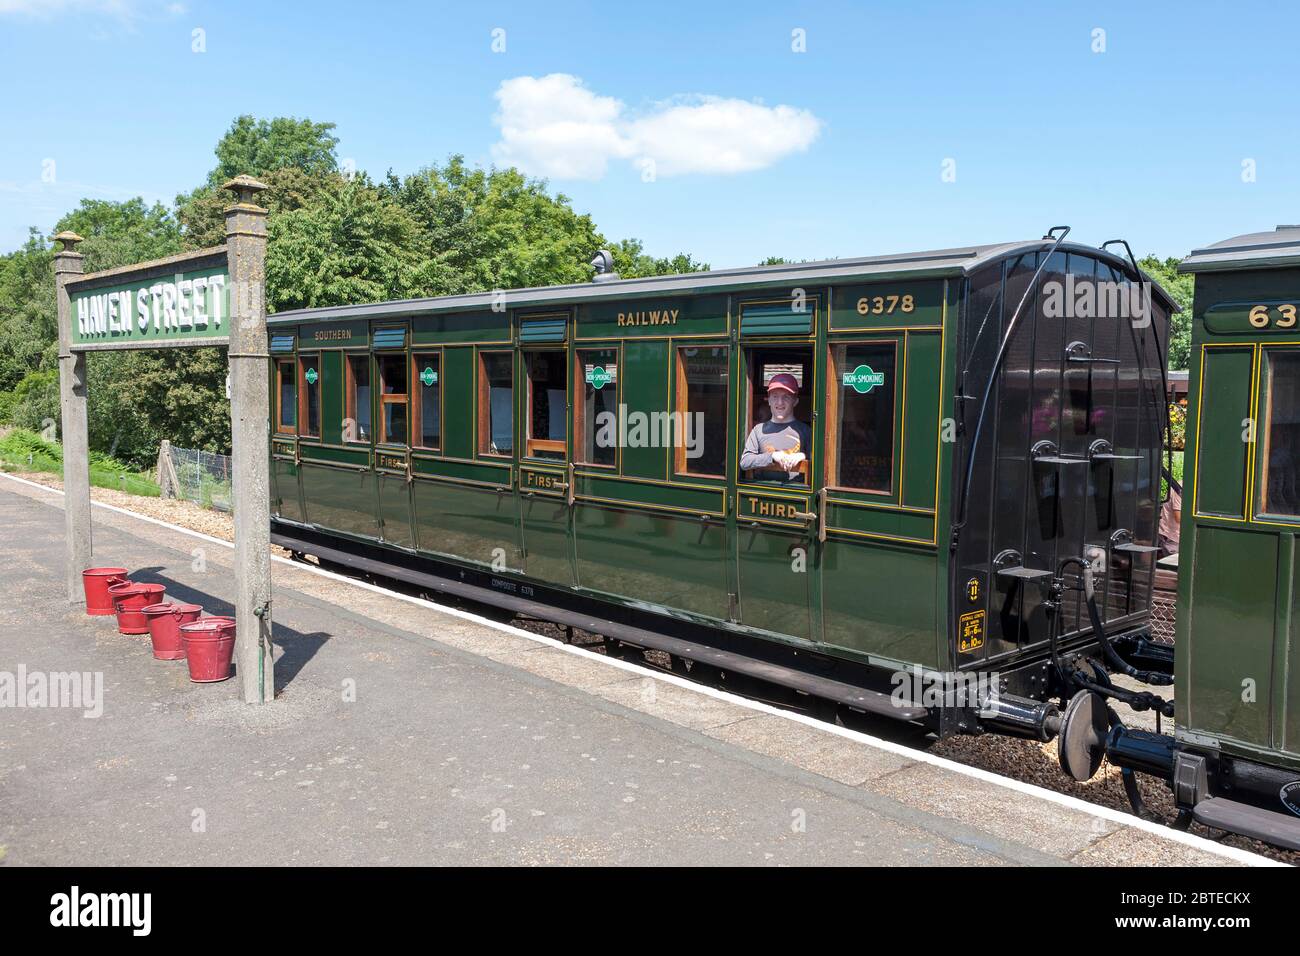 Vintage carriages wait at the platform at Haven Street on the Isle of Wight Steam Railway, Isle of Wight, UK.  Four-wheeled carriage 6378 is a 4-compa Stock Photo